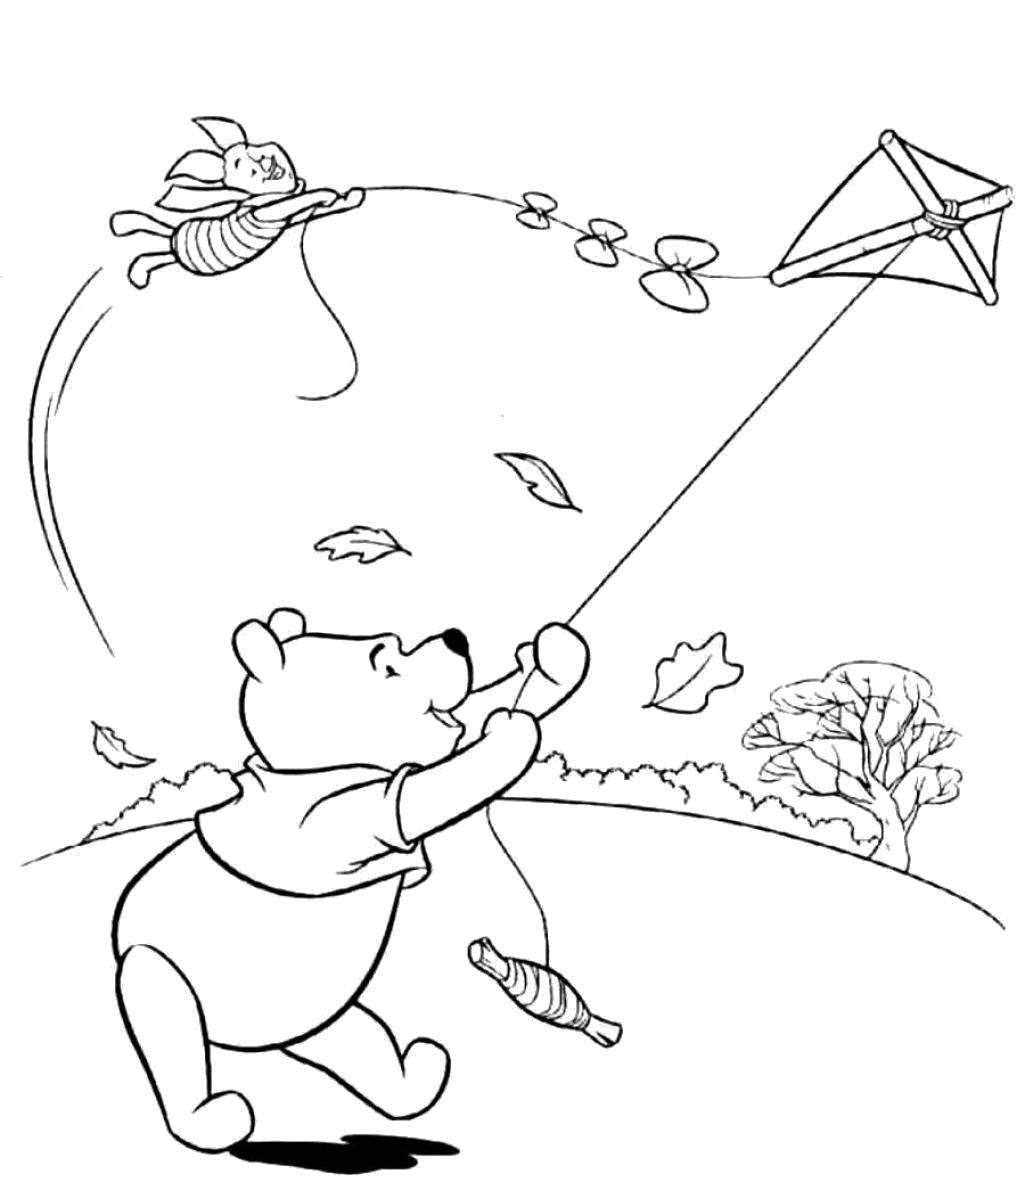 Coloring Winnie the Pooh pushing Piglet. Category a kite. Tags:  Cartoon character.